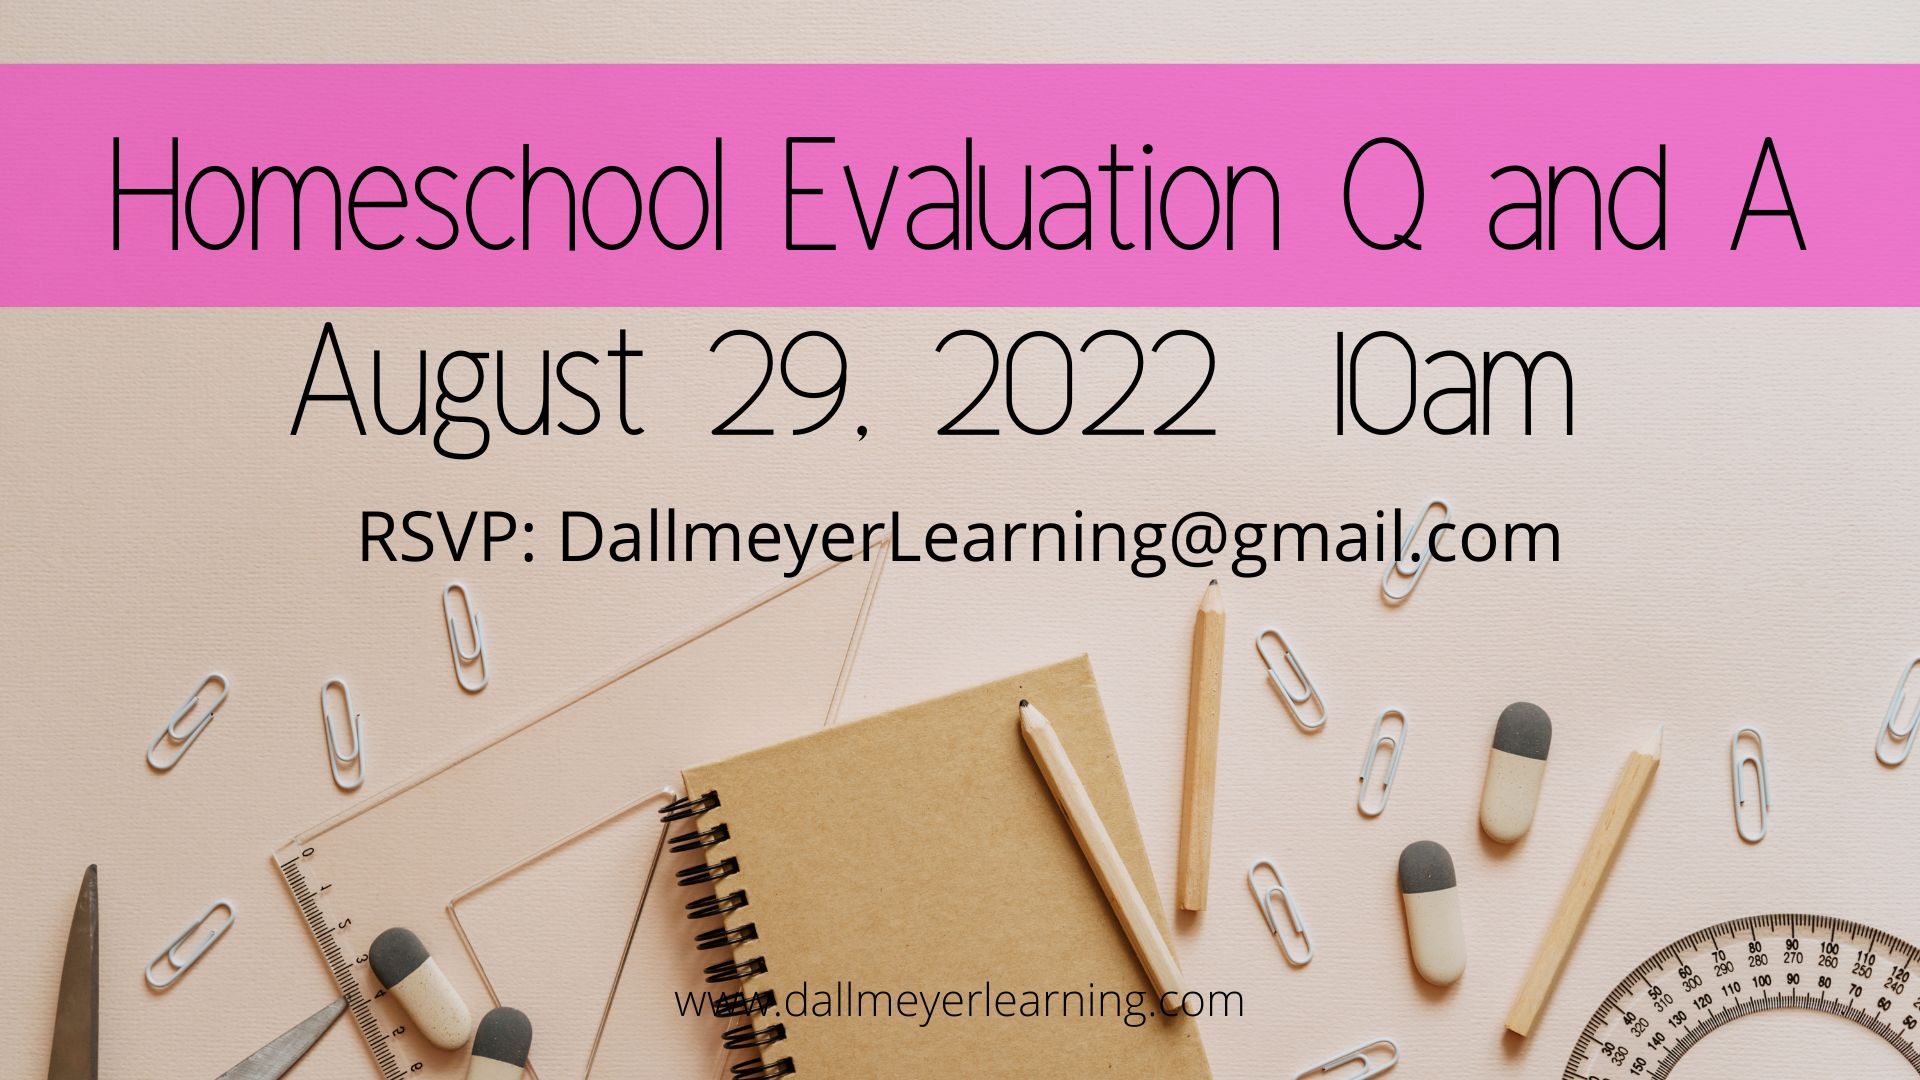 Homeschool Evaluation Q and A August 29, 2022